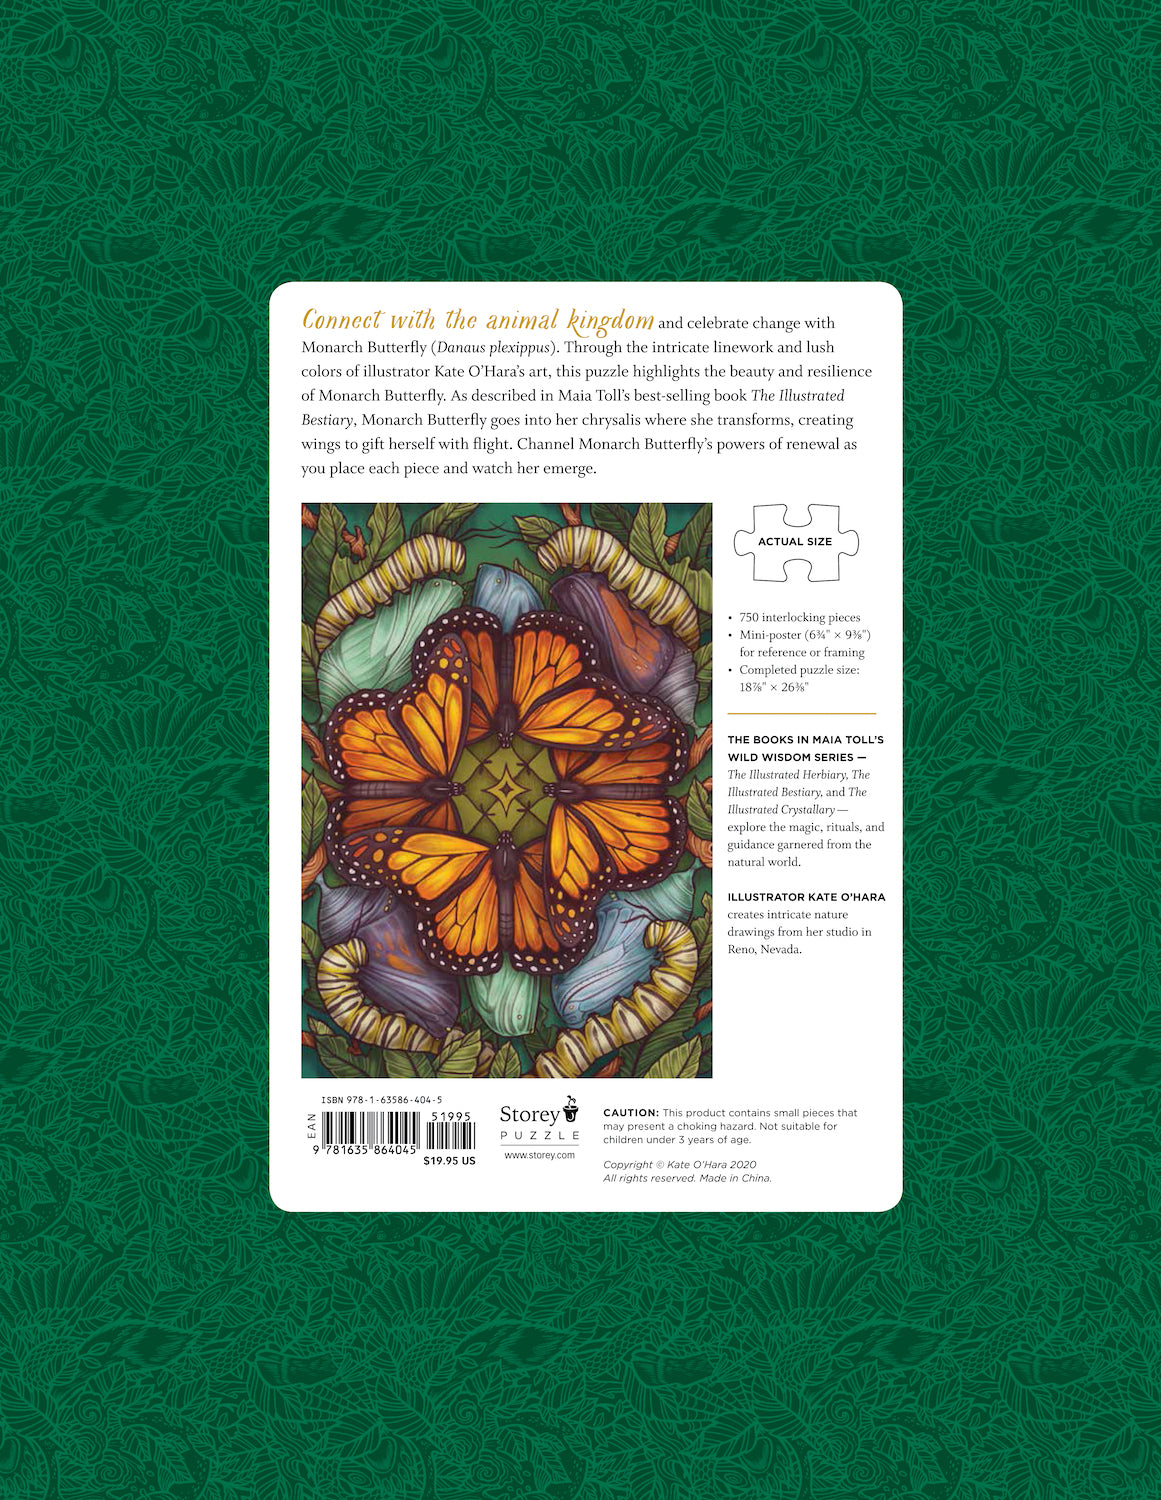 The Illustrated Bestiary Puzzle: Monarch Butterfly - 750 Pieces